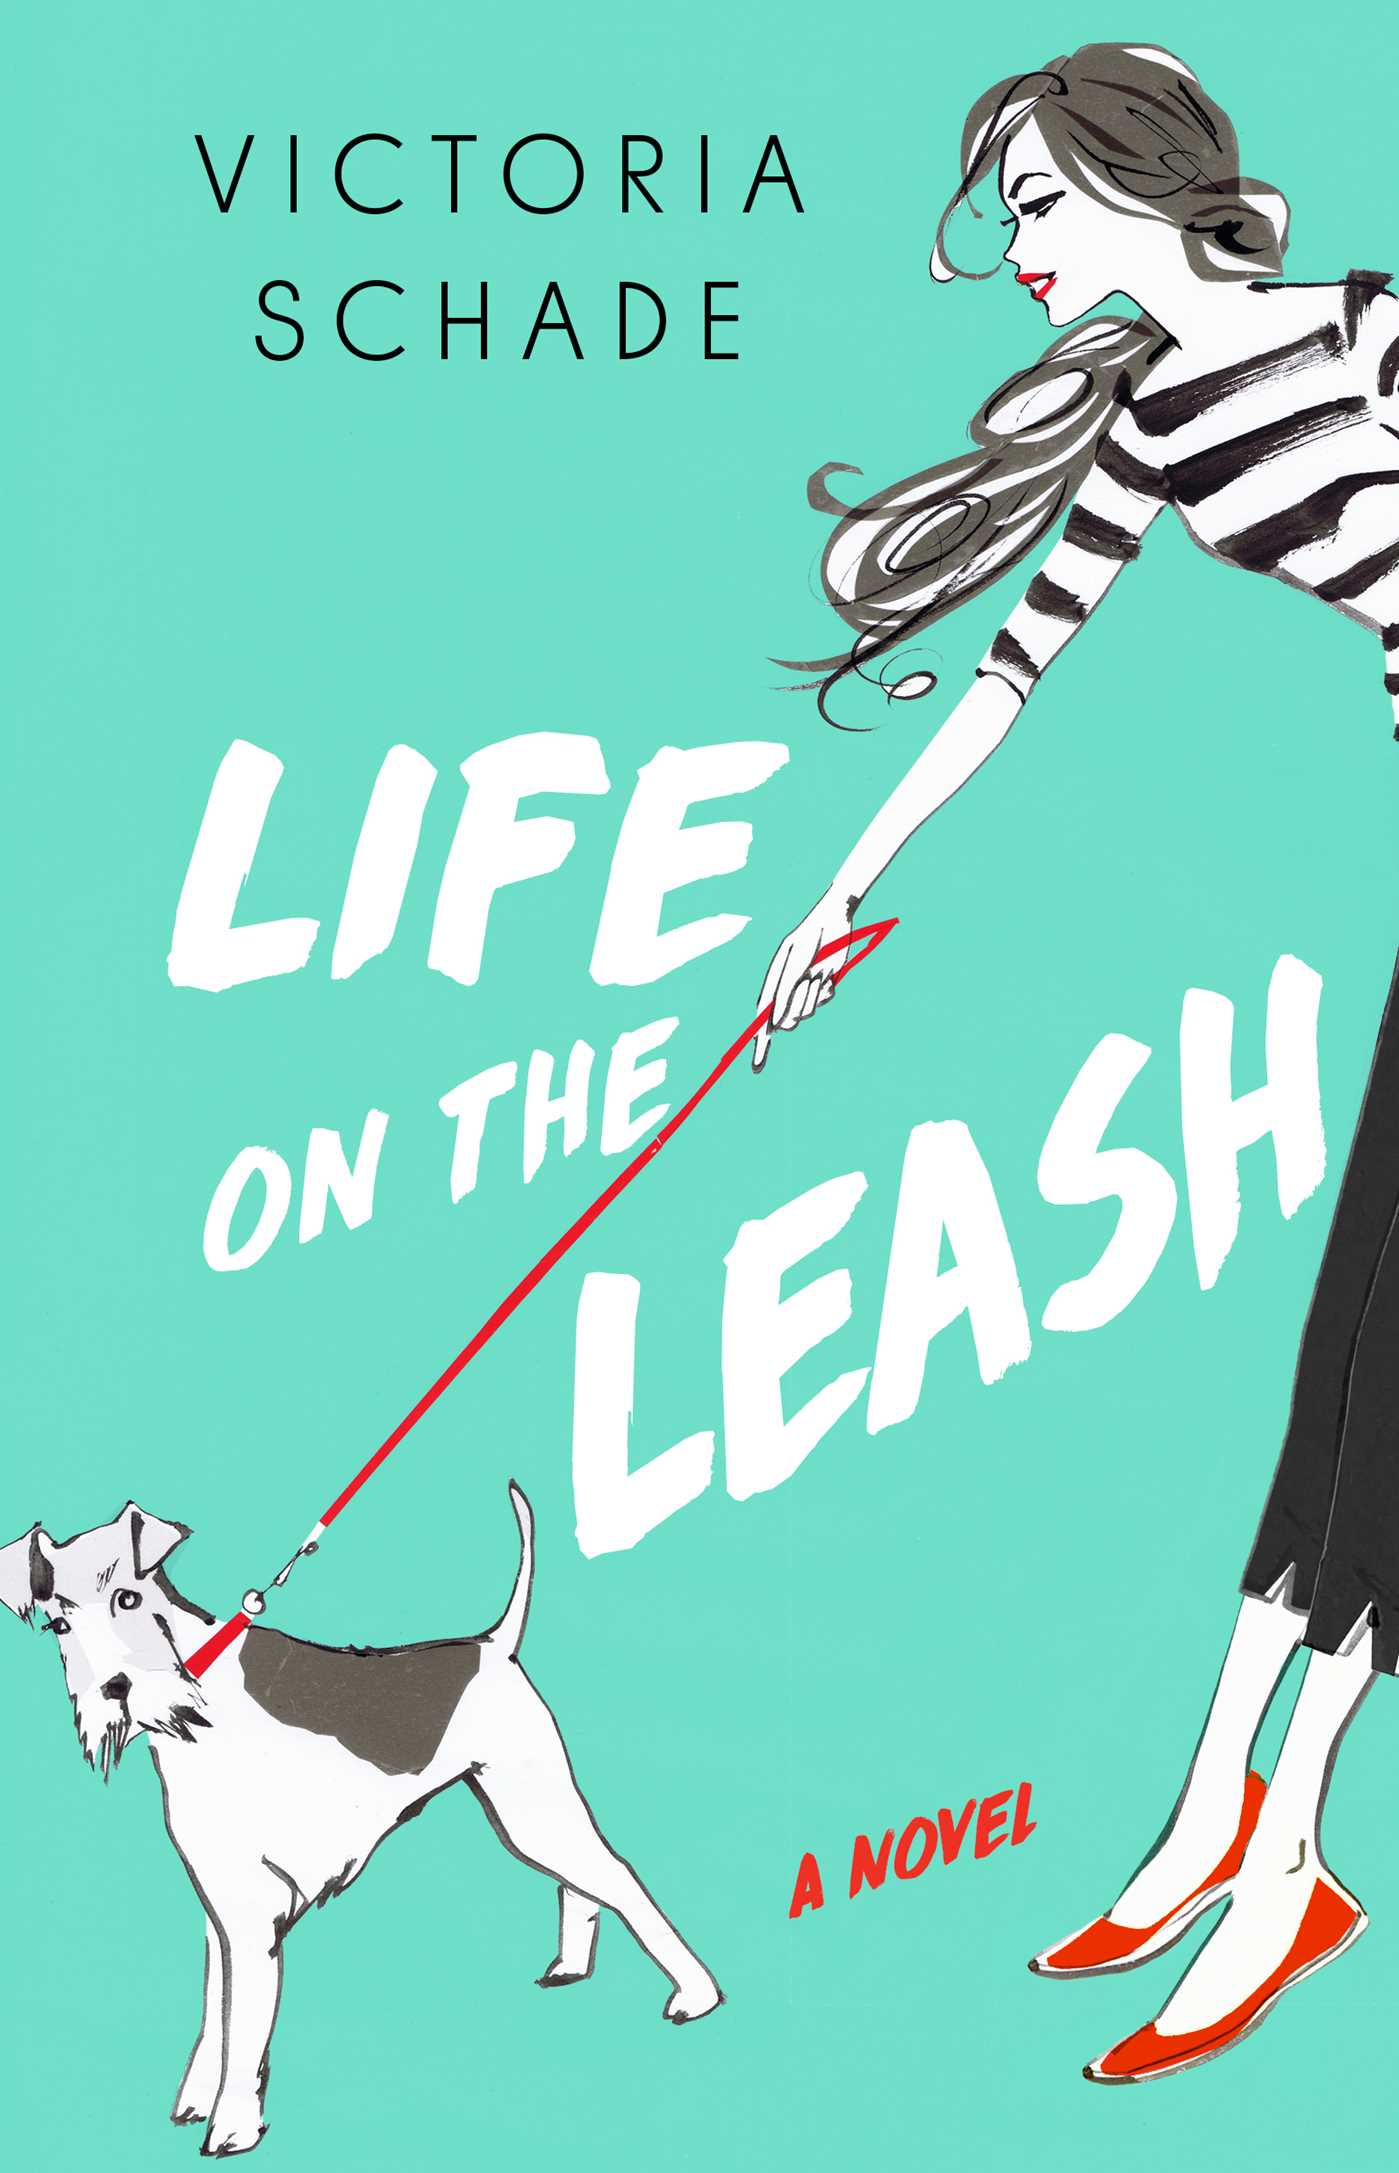 Life on a Leash by Victoria Schade